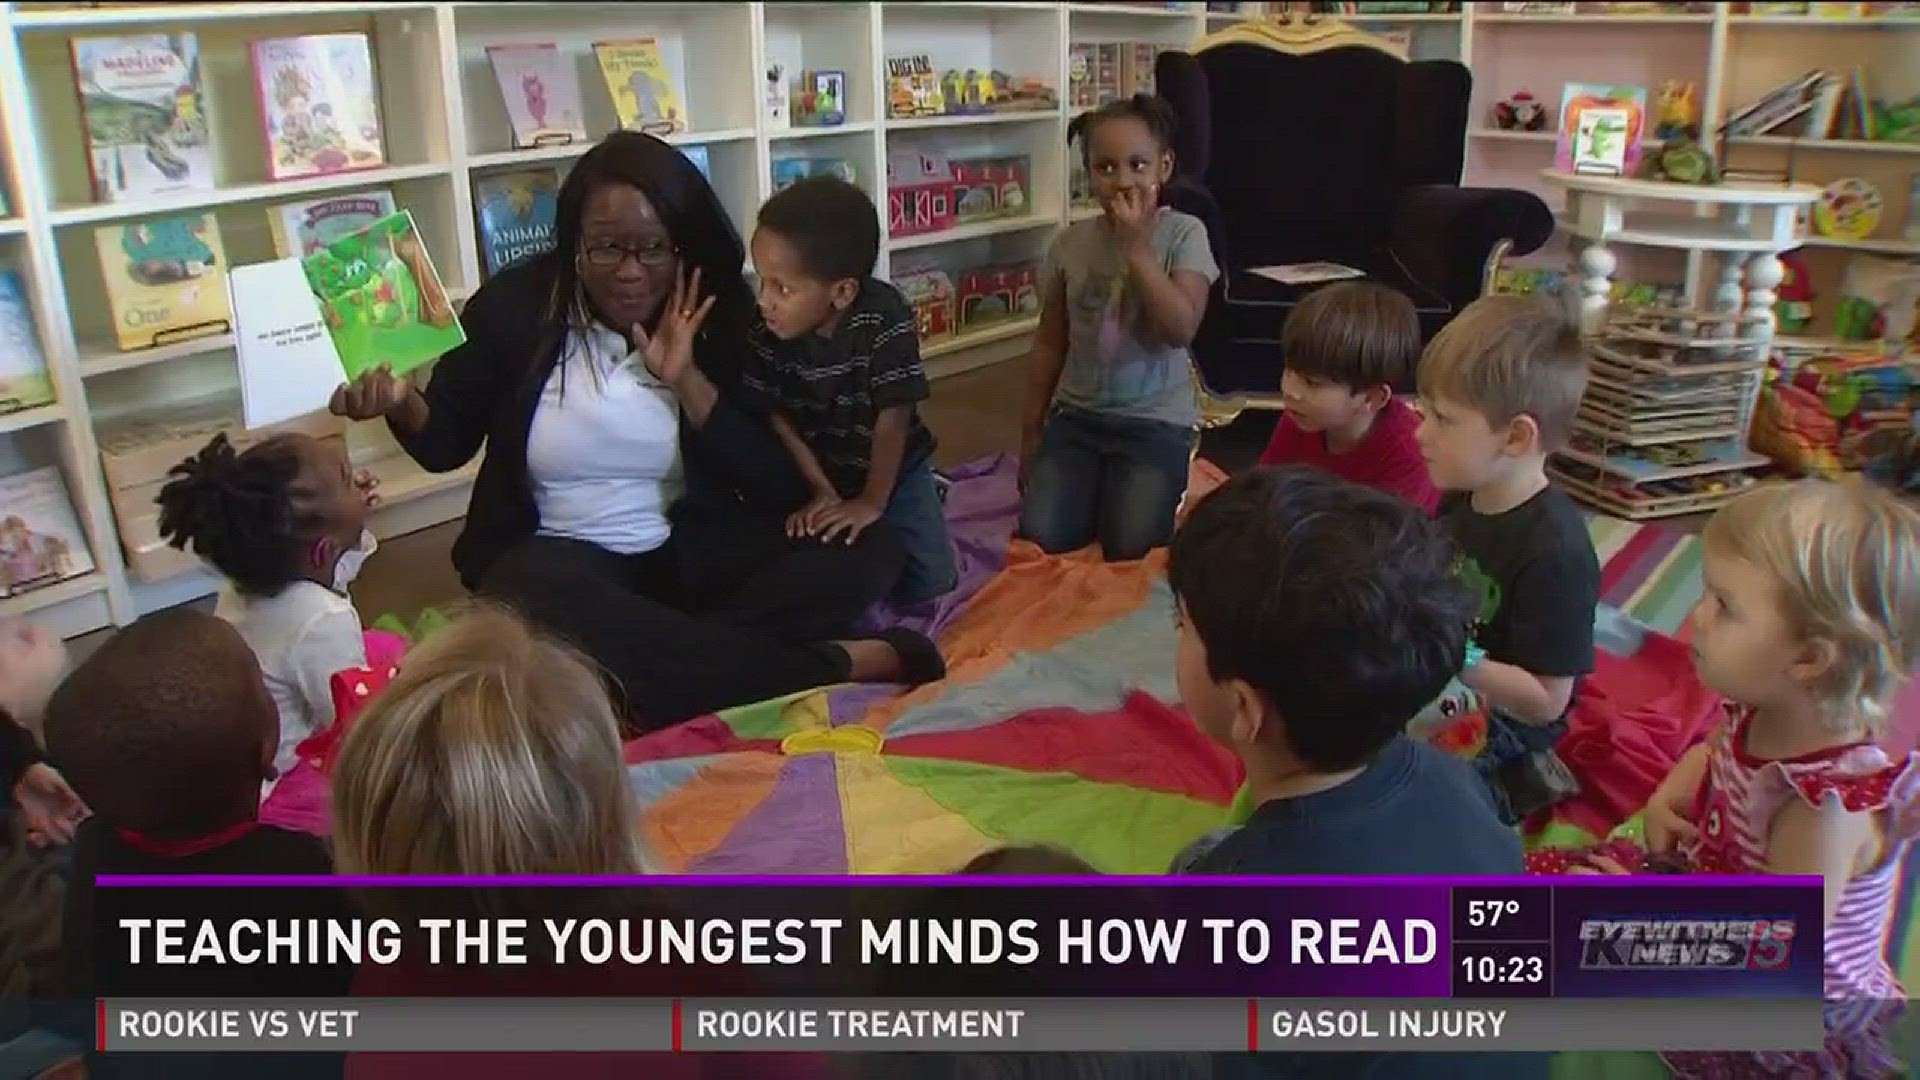 Teaching the youngest minds how to read